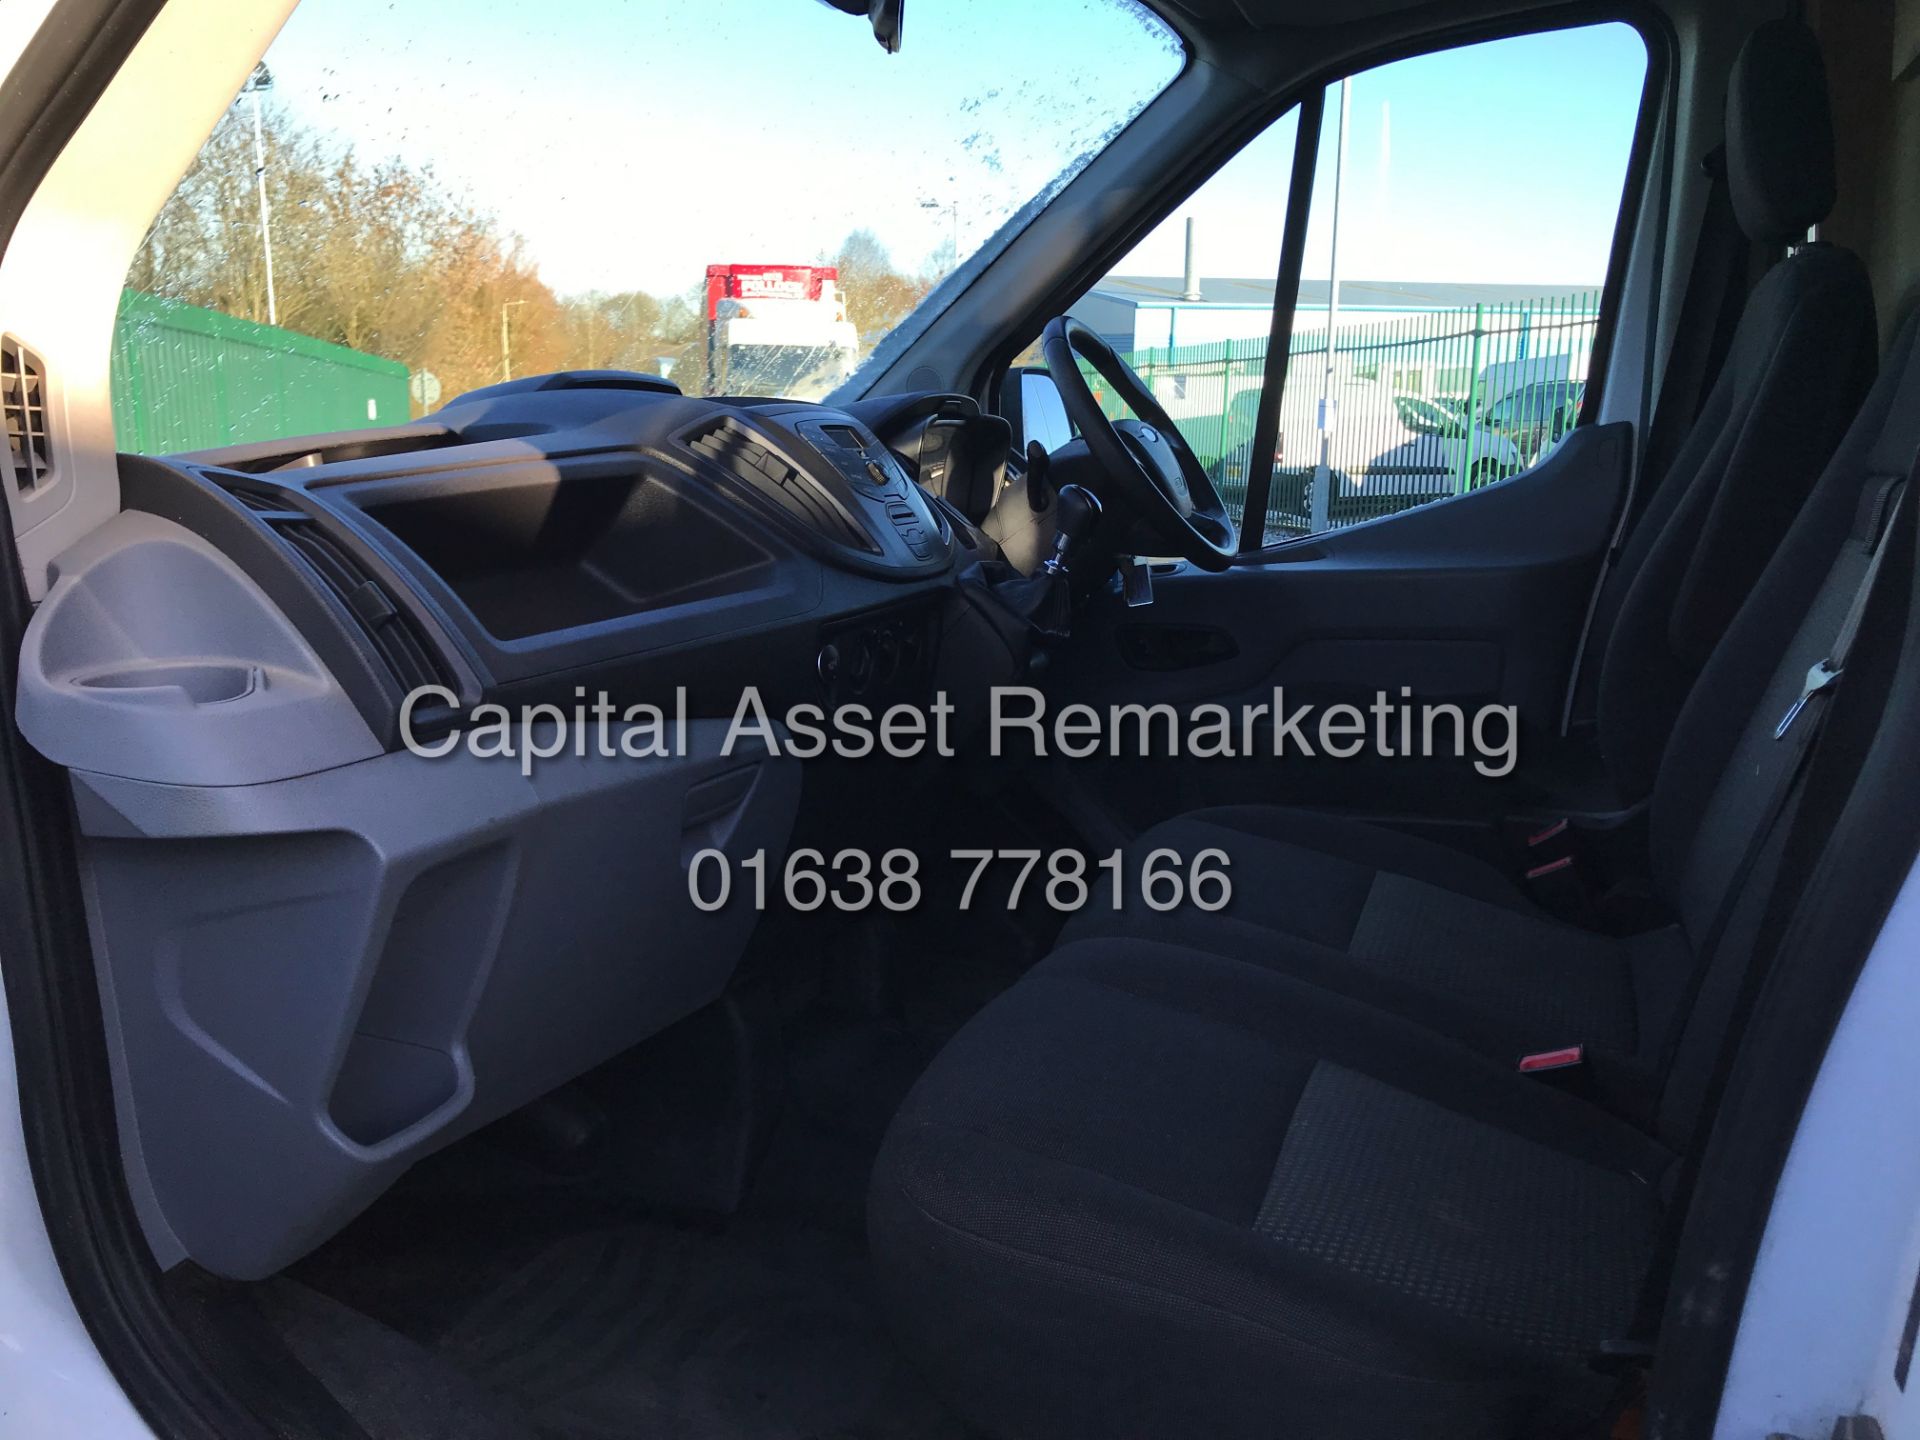 (ON SALE) FORD TRASNIT 2.2TDCI "125BHP - 6 SPEED" T350 D/C "TIPPER" (16 REG) 1 OWNER - LOW MILEAGE - Image 11 of 13